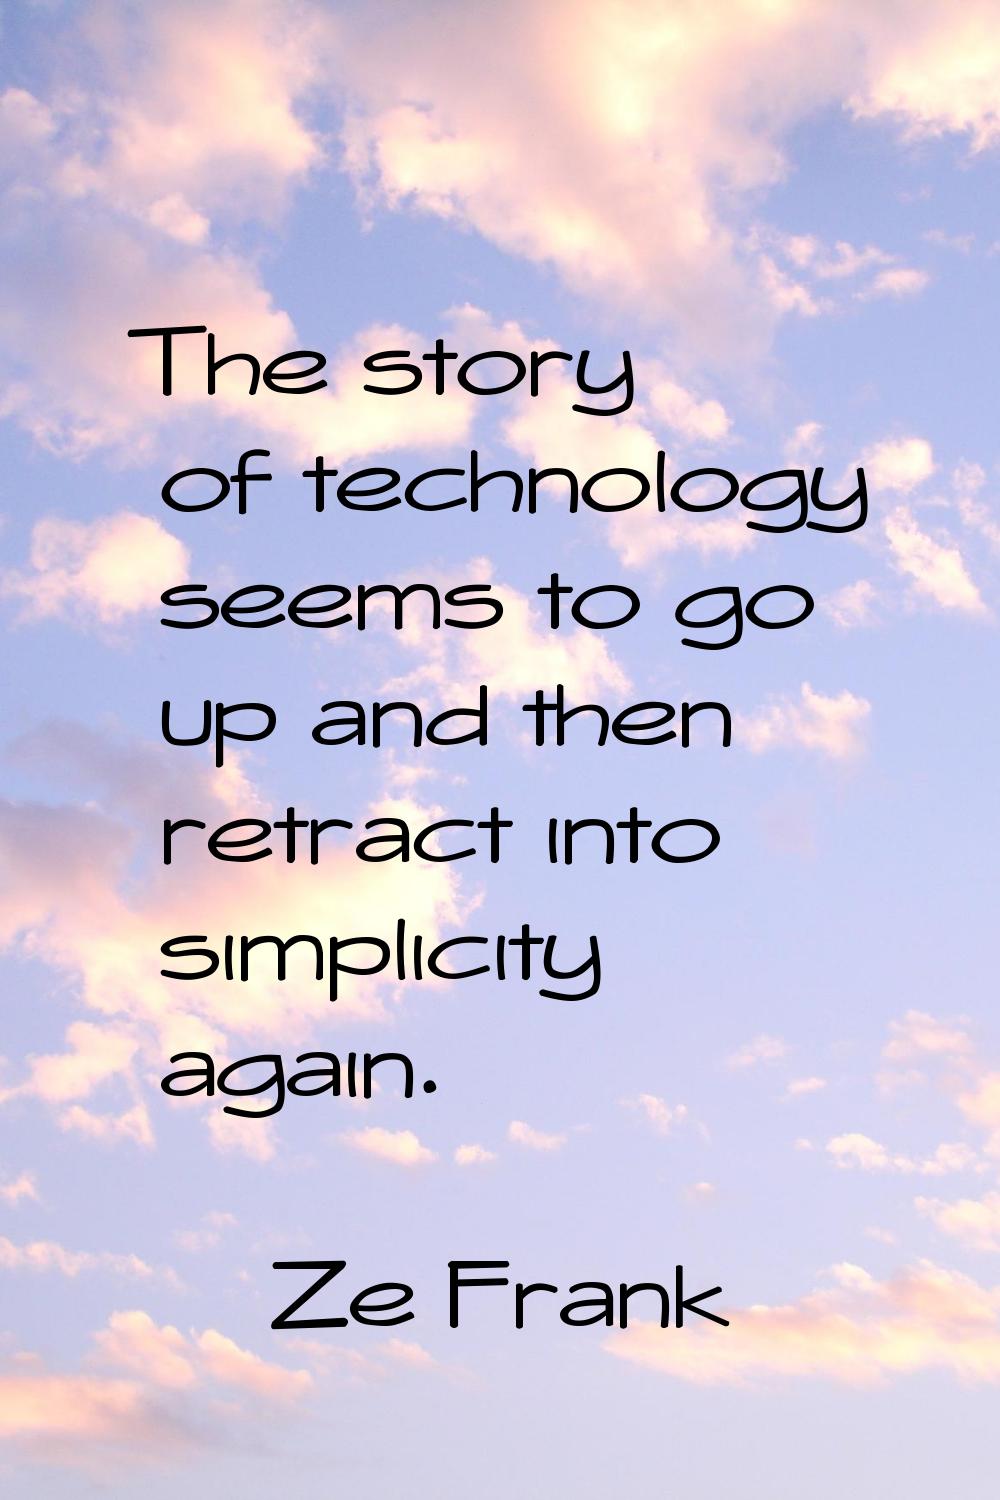 The story of technology seems to go up and then retract into simplicity again.